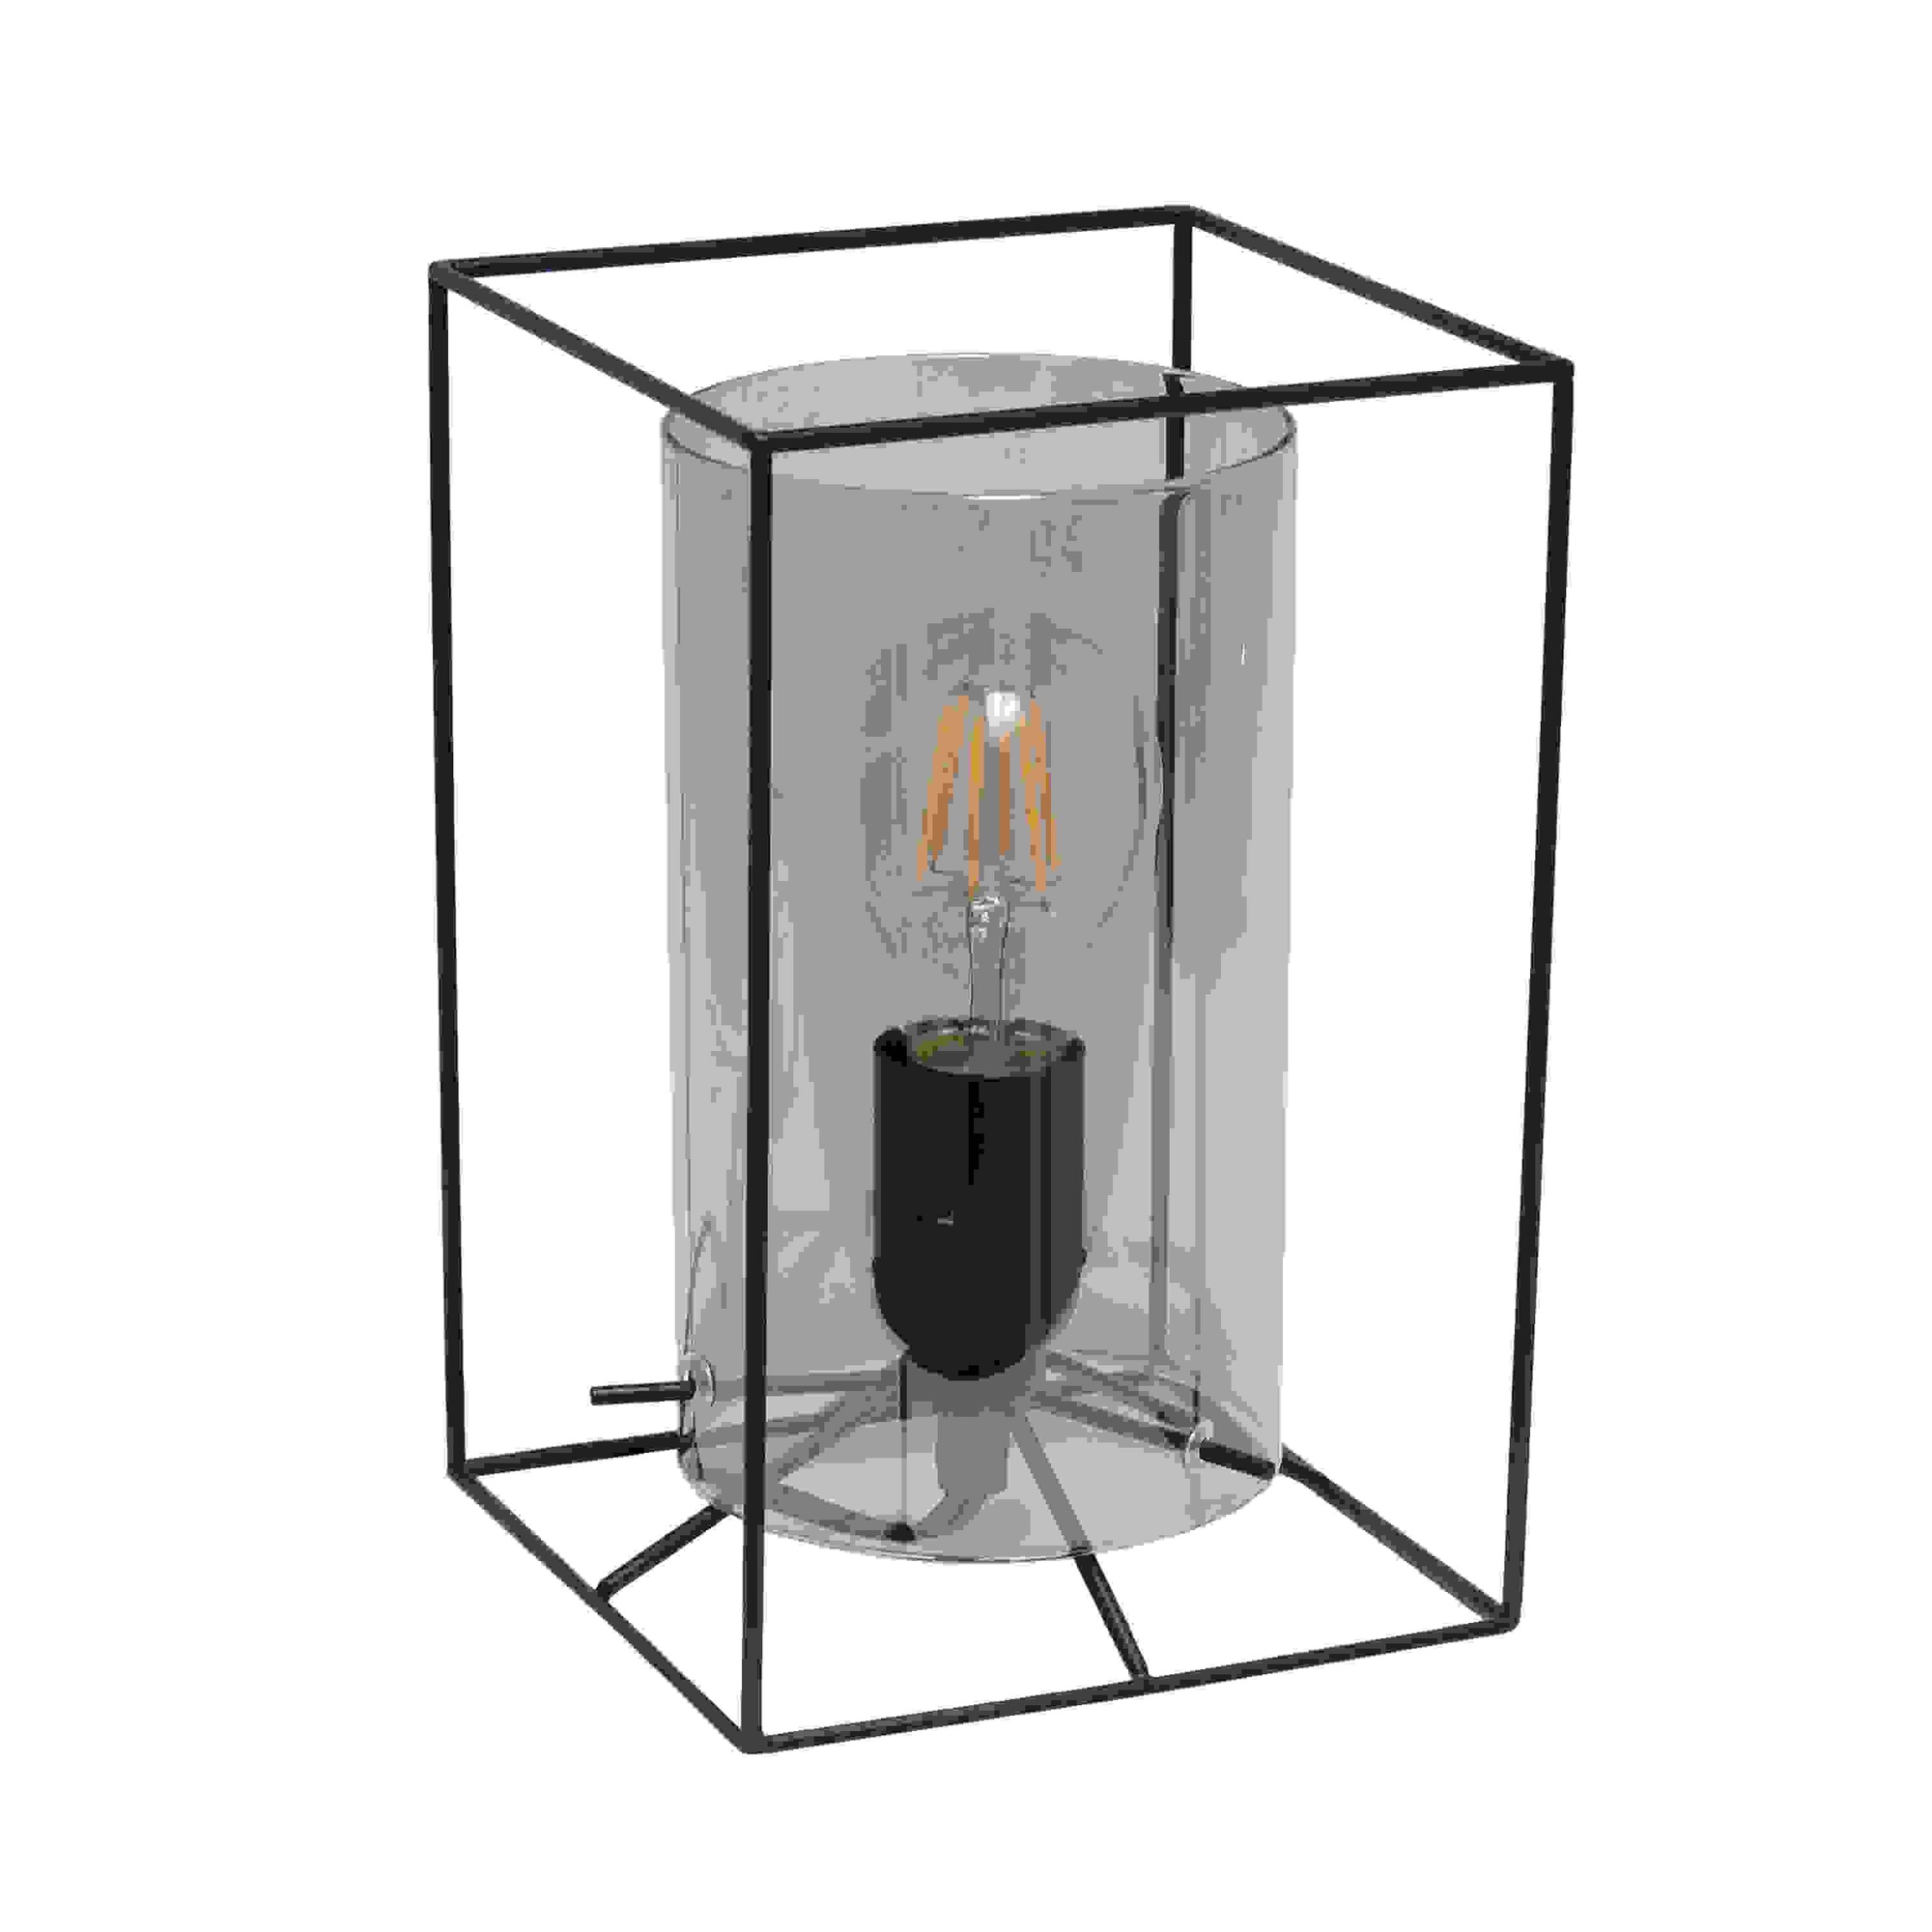  Lalia Home Black Framed Table Lamp with Smoked Cylinder Glass Shade, Small